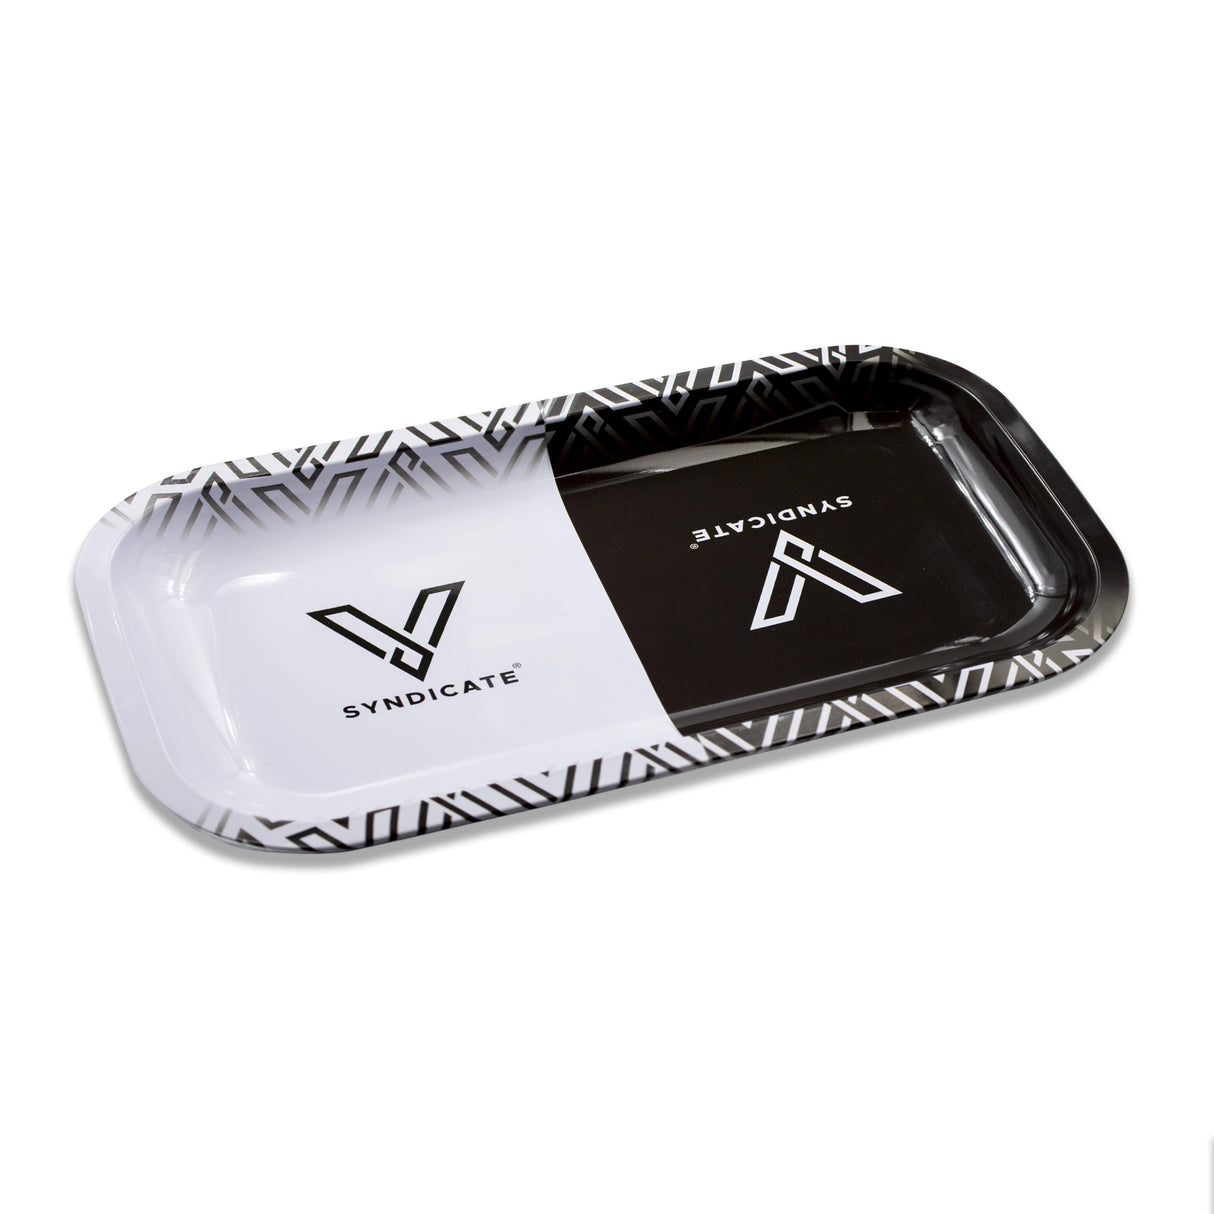 V Syndicate Hybrid Rollin' Tray in black and white, medium size, angled top view, perfect for rolling